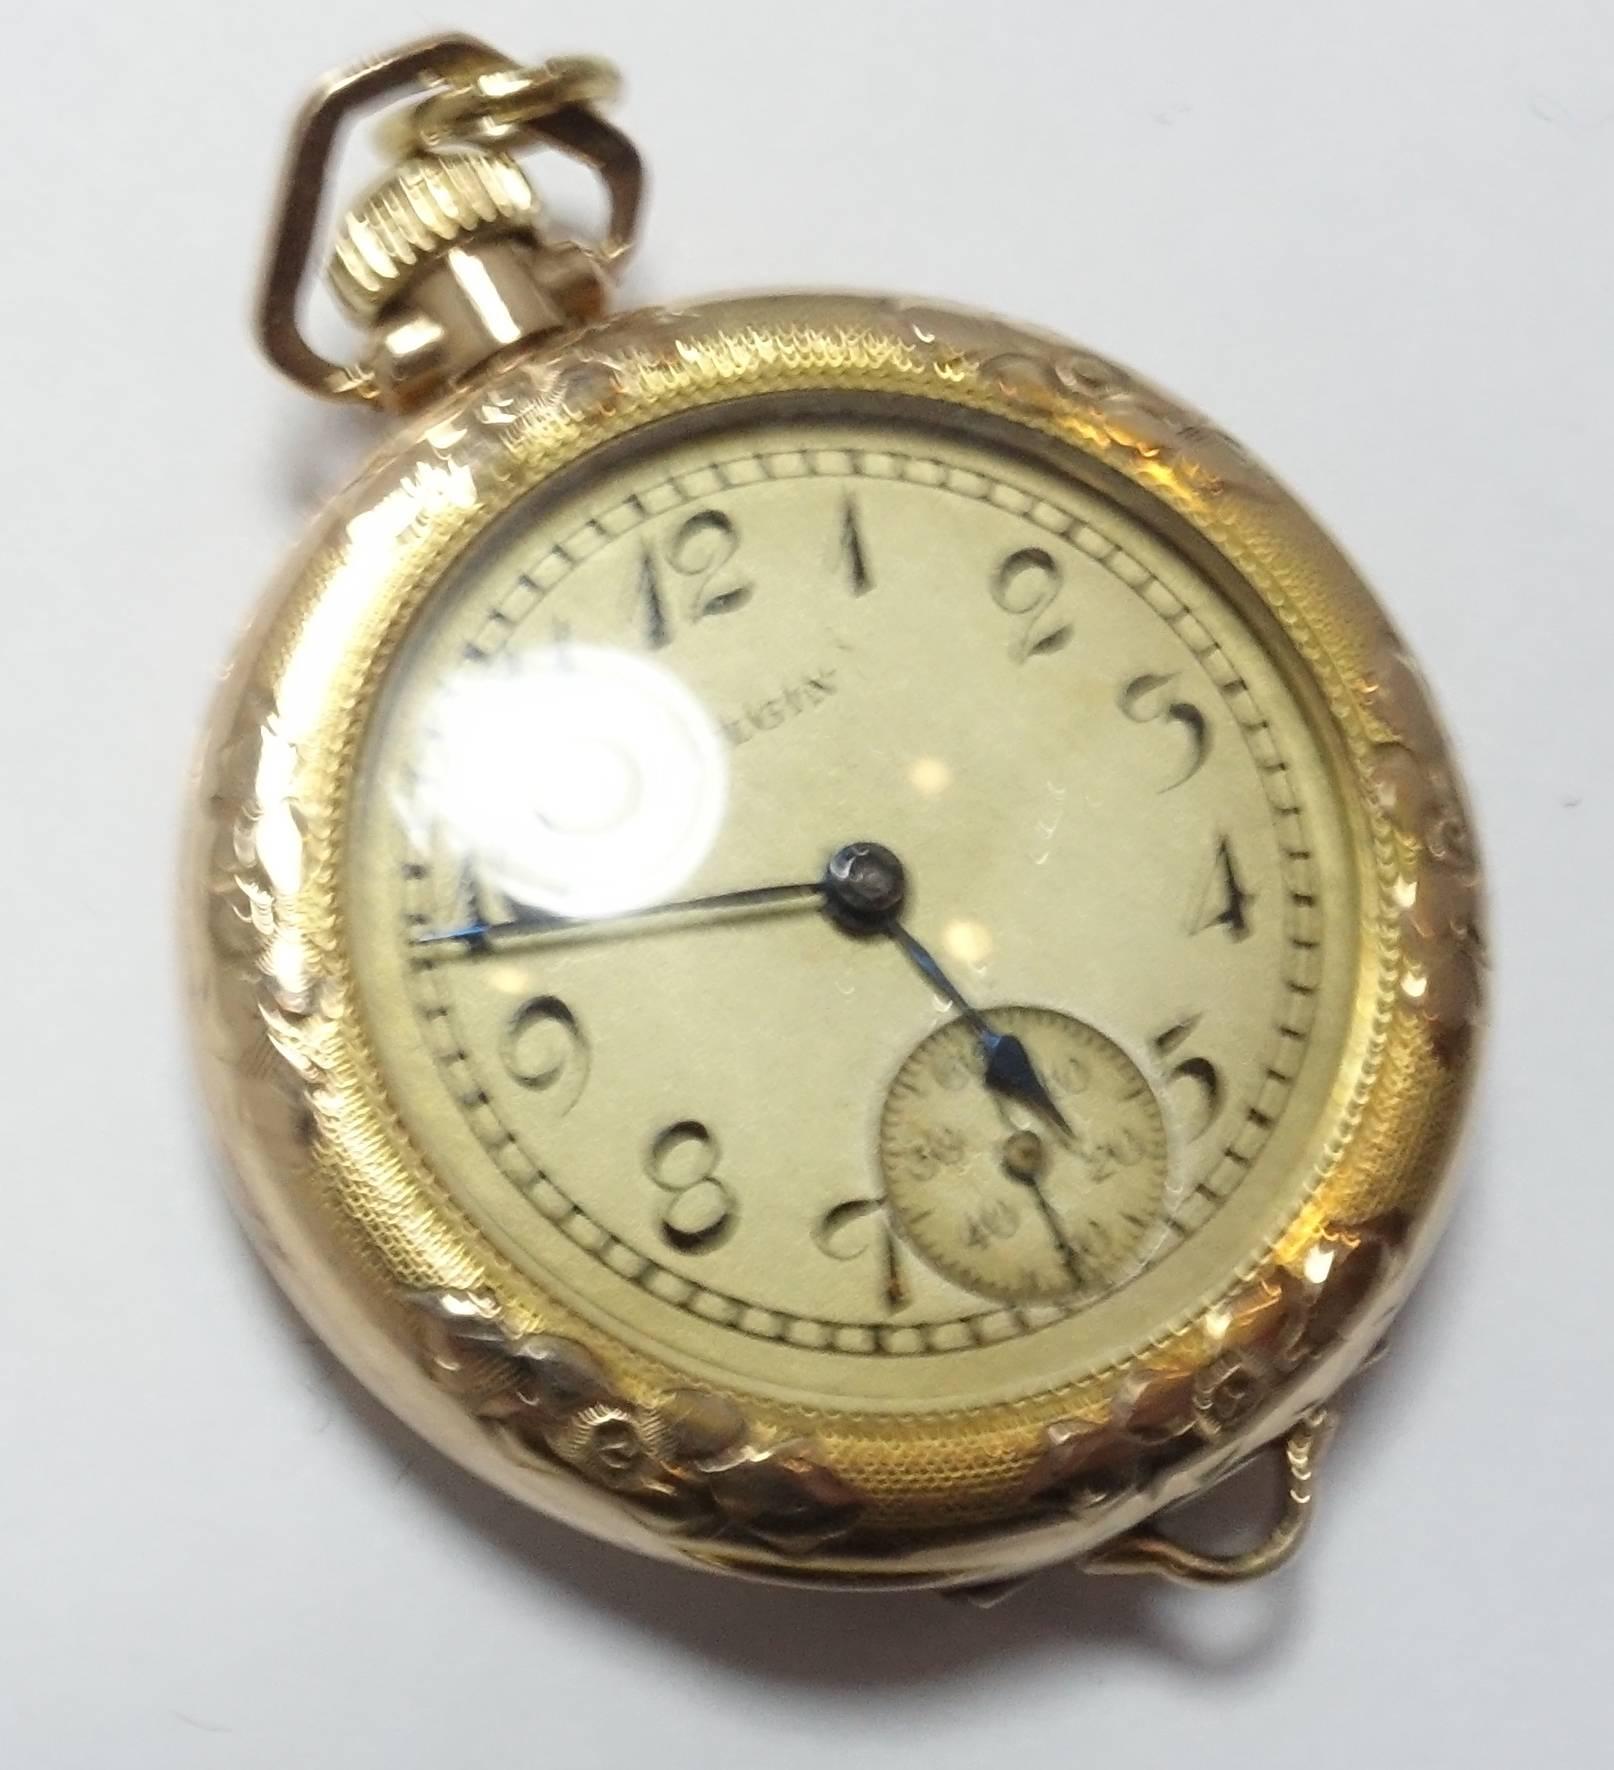 When I first saw this watch, I thought it was gold.  But the way gold-filled watches were made in the 1930s and 40s, especially by Elgin, it’s made to look that way.  There are initials on the back that looks like JMG in the old Victorian lettering.